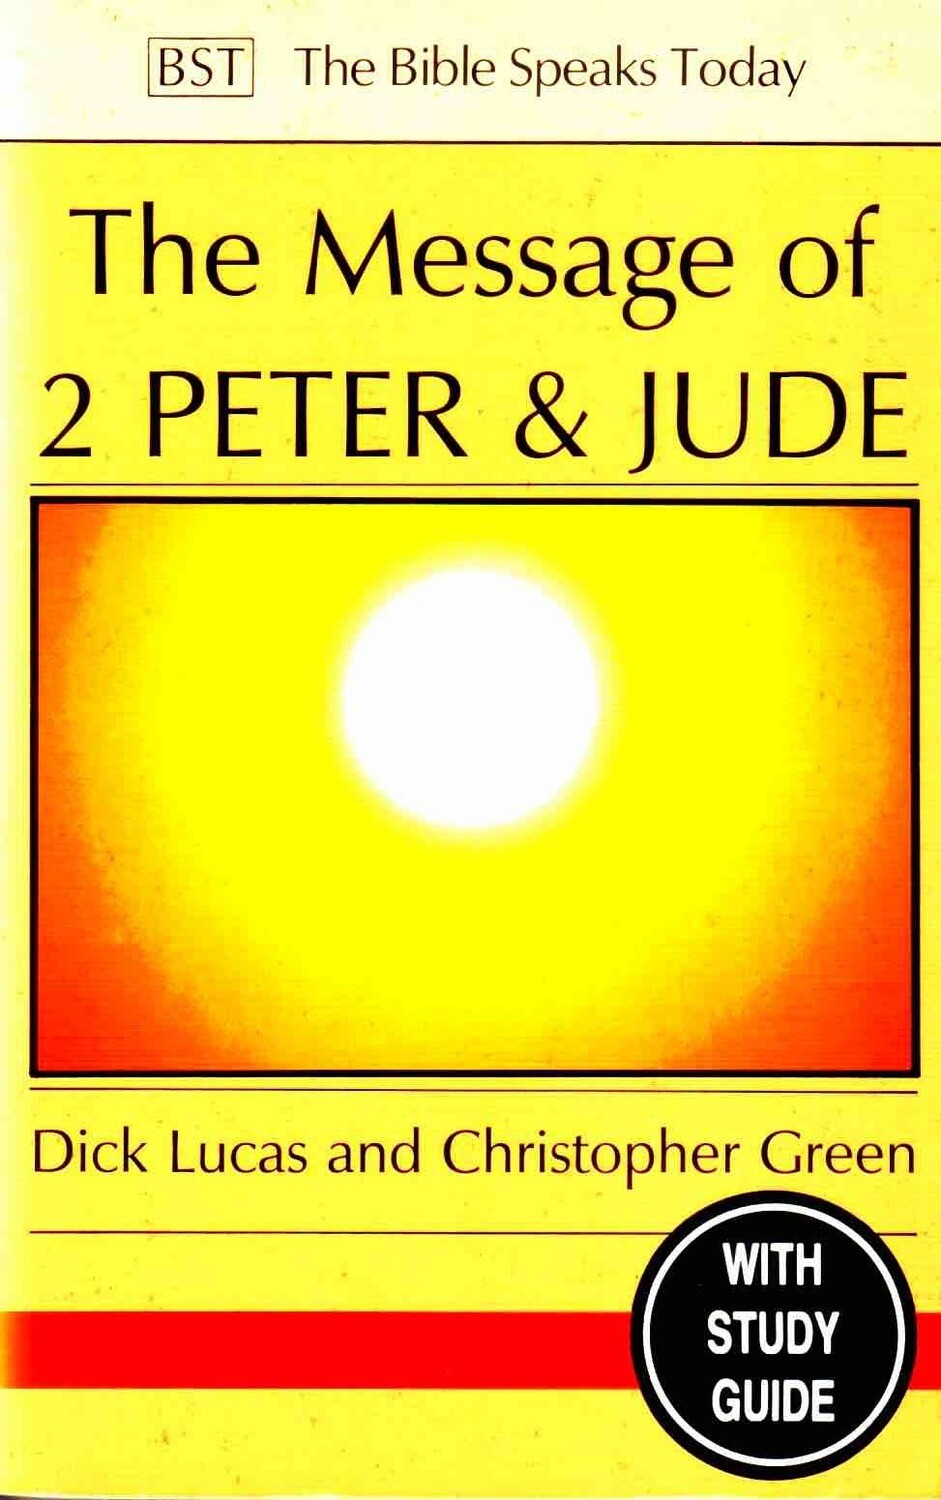 Dick Lucas & Christopher Green - The Message of 2 Peter and Jude